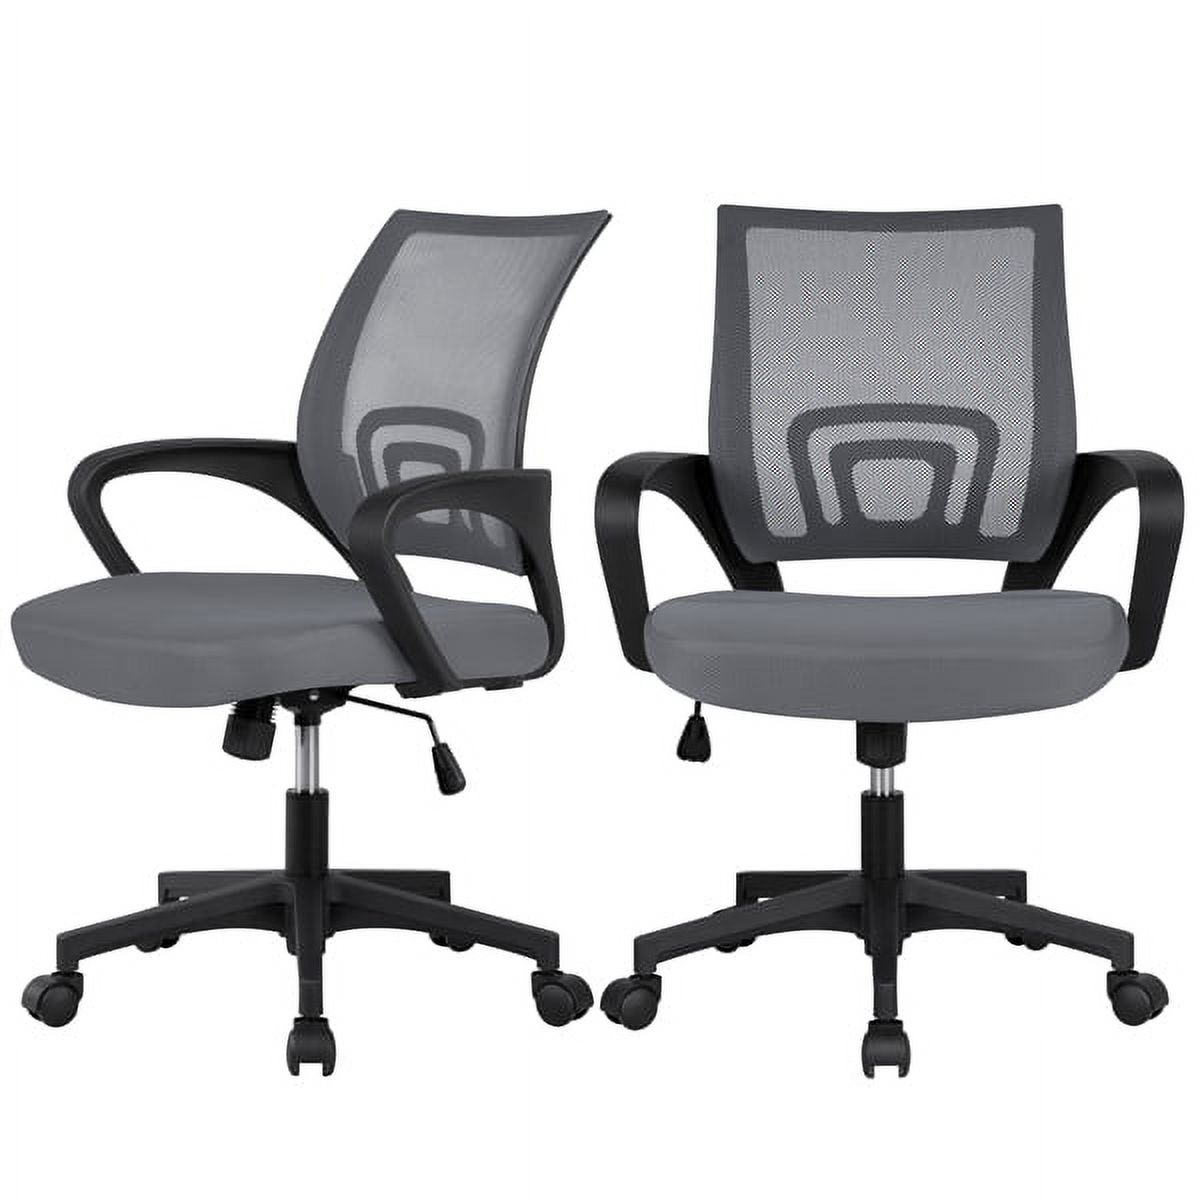 Adjustable Mesh Swivel Office Chair with Armrest, Set of 2, Dark Gray - image 1 of 8